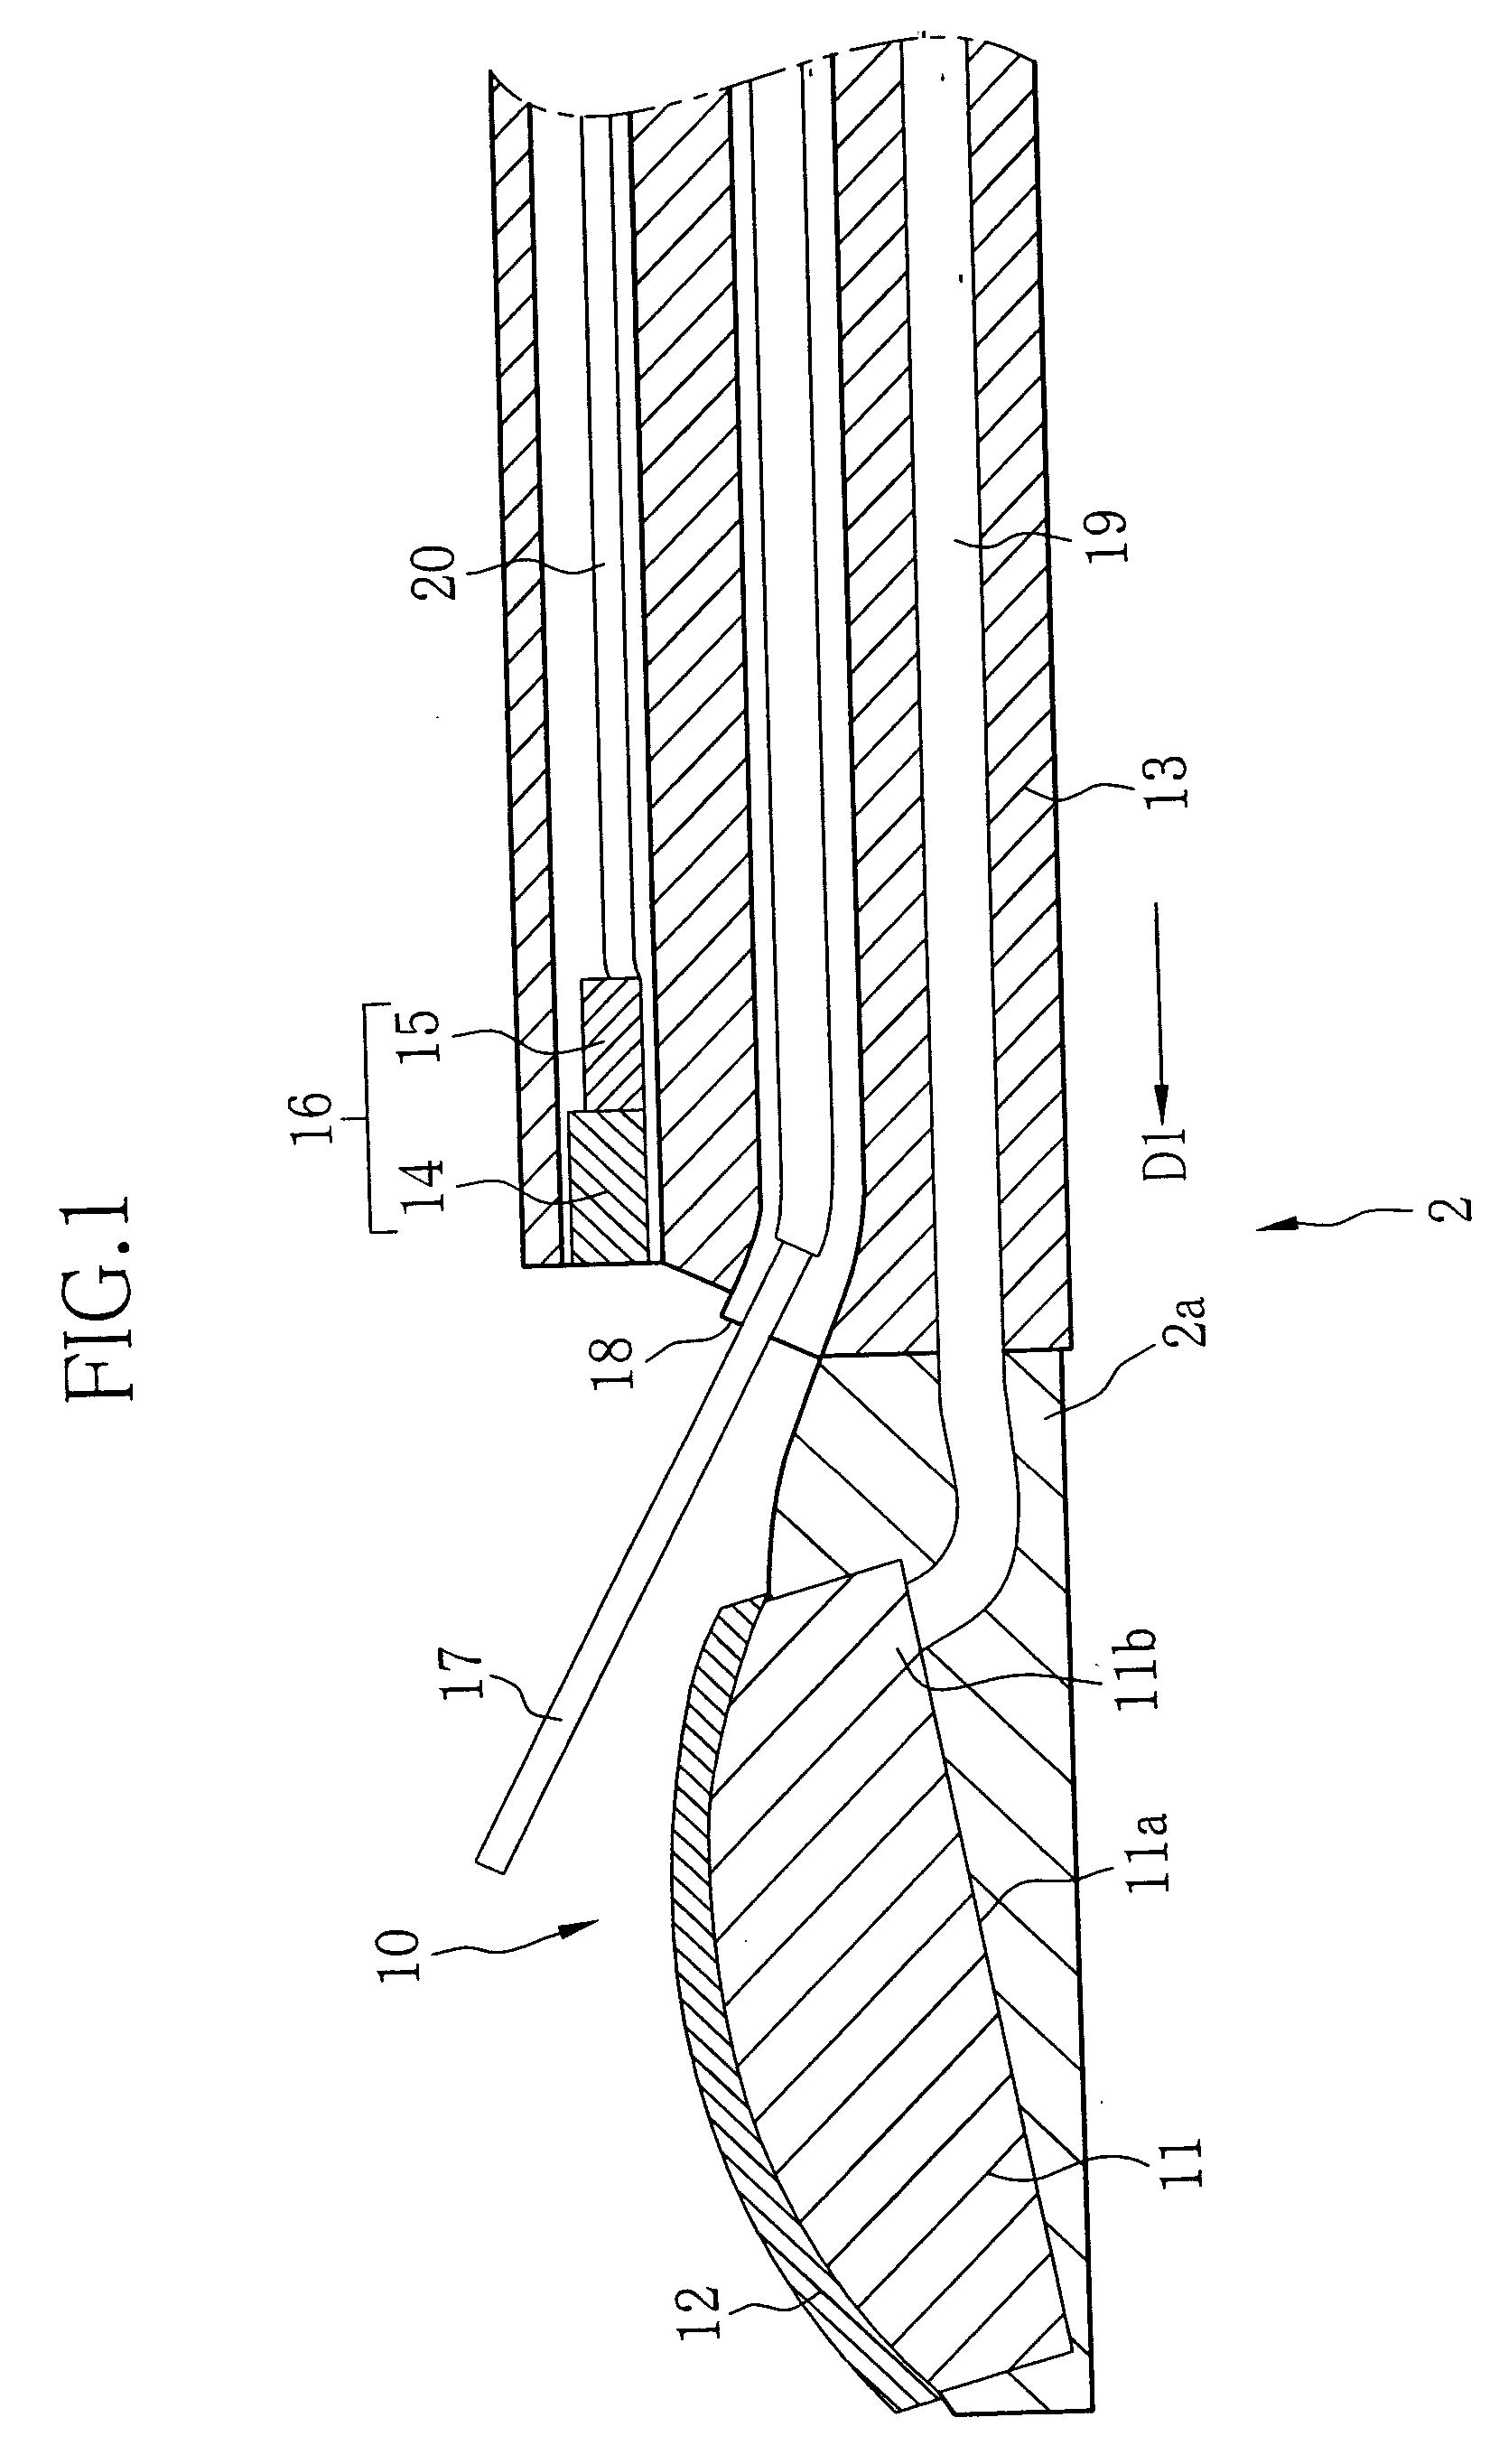 Ultrasonic probe for intra-cavity diagnosis and manufacturing method thereof